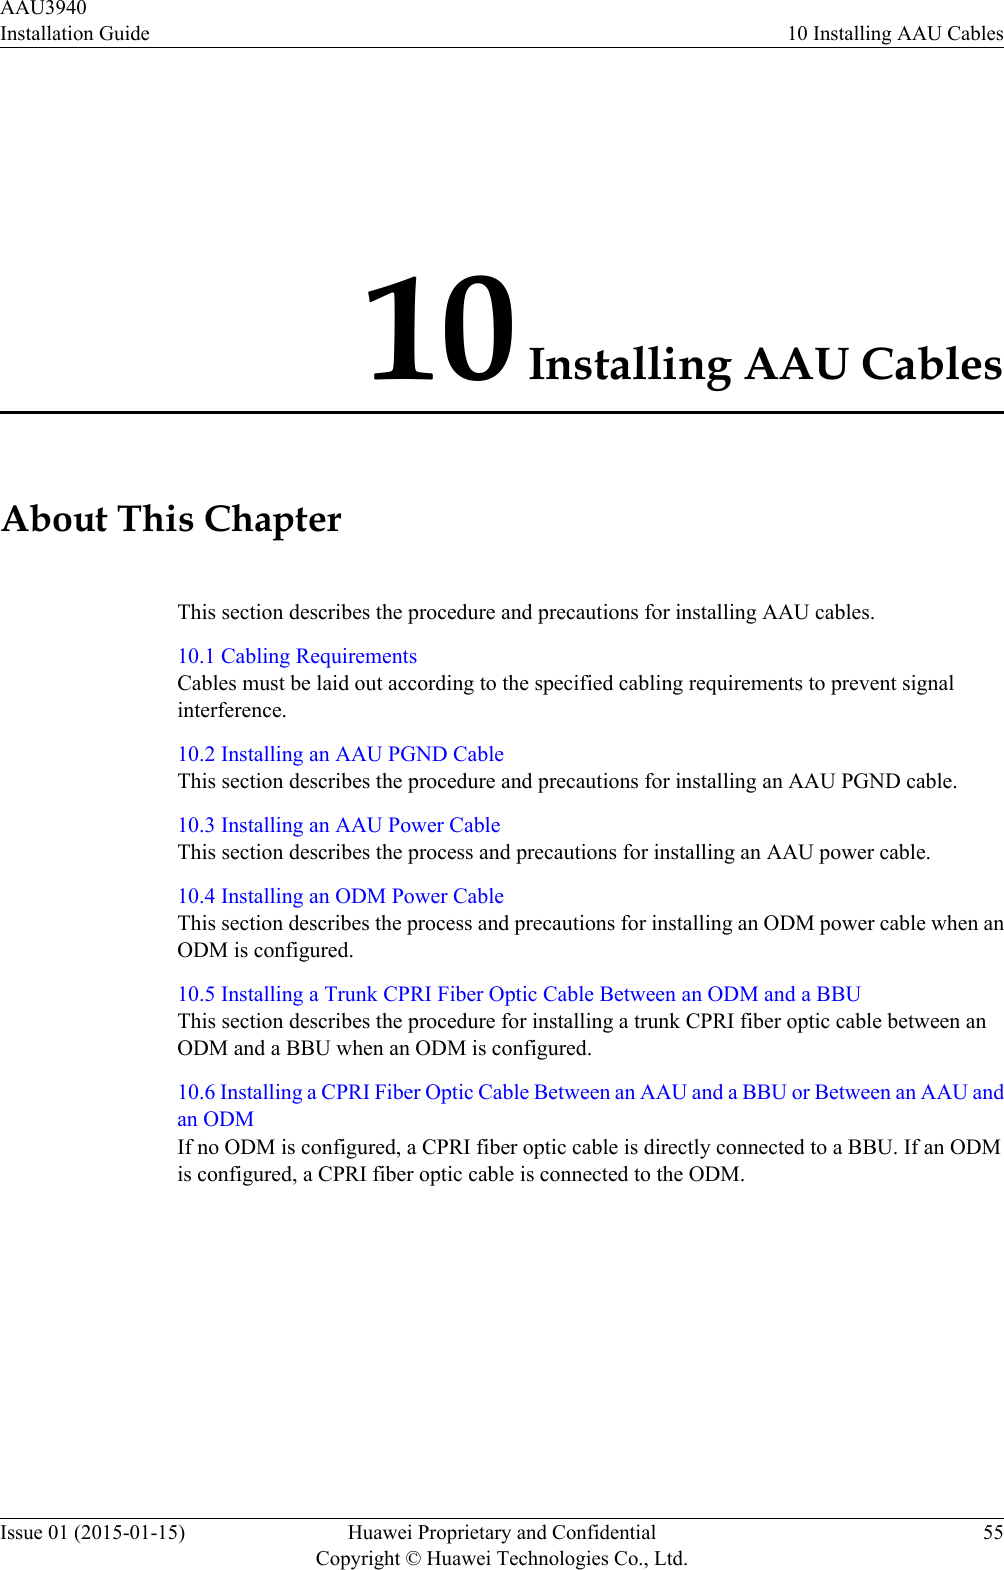 10 Installing AAU CablesAbout This ChapterThis section describes the procedure and precautions for installing AAU cables.10.1 Cabling RequirementsCables must be laid out according to the specified cabling requirements to prevent signalinterference.10.2 Installing an AAU PGND CableThis section describes the procedure and precautions for installing an AAU PGND cable.10.3 Installing an AAU Power CableThis section describes the process and precautions for installing an AAU power cable.10.4 Installing an ODM Power CableThis section describes the process and precautions for installing an ODM power cable when anODM is configured.10.5 Installing a Trunk CPRI Fiber Optic Cable Between an ODM and a BBUThis section describes the procedure for installing a trunk CPRI fiber optic cable between anODM and a BBU when an ODM is configured.10.6 Installing a CPRI Fiber Optic Cable Between an AAU and a BBU or Between an AAU andan ODMIf no ODM is configured, a CPRI fiber optic cable is directly connected to a BBU. If an ODMis configured, a CPRI fiber optic cable is connected to the ODM.AAU3940Installation Guide 10 Installing AAU CablesIssue 01 (2015-01-15) Huawei Proprietary and ConfidentialCopyright © Huawei Technologies Co., Ltd.55